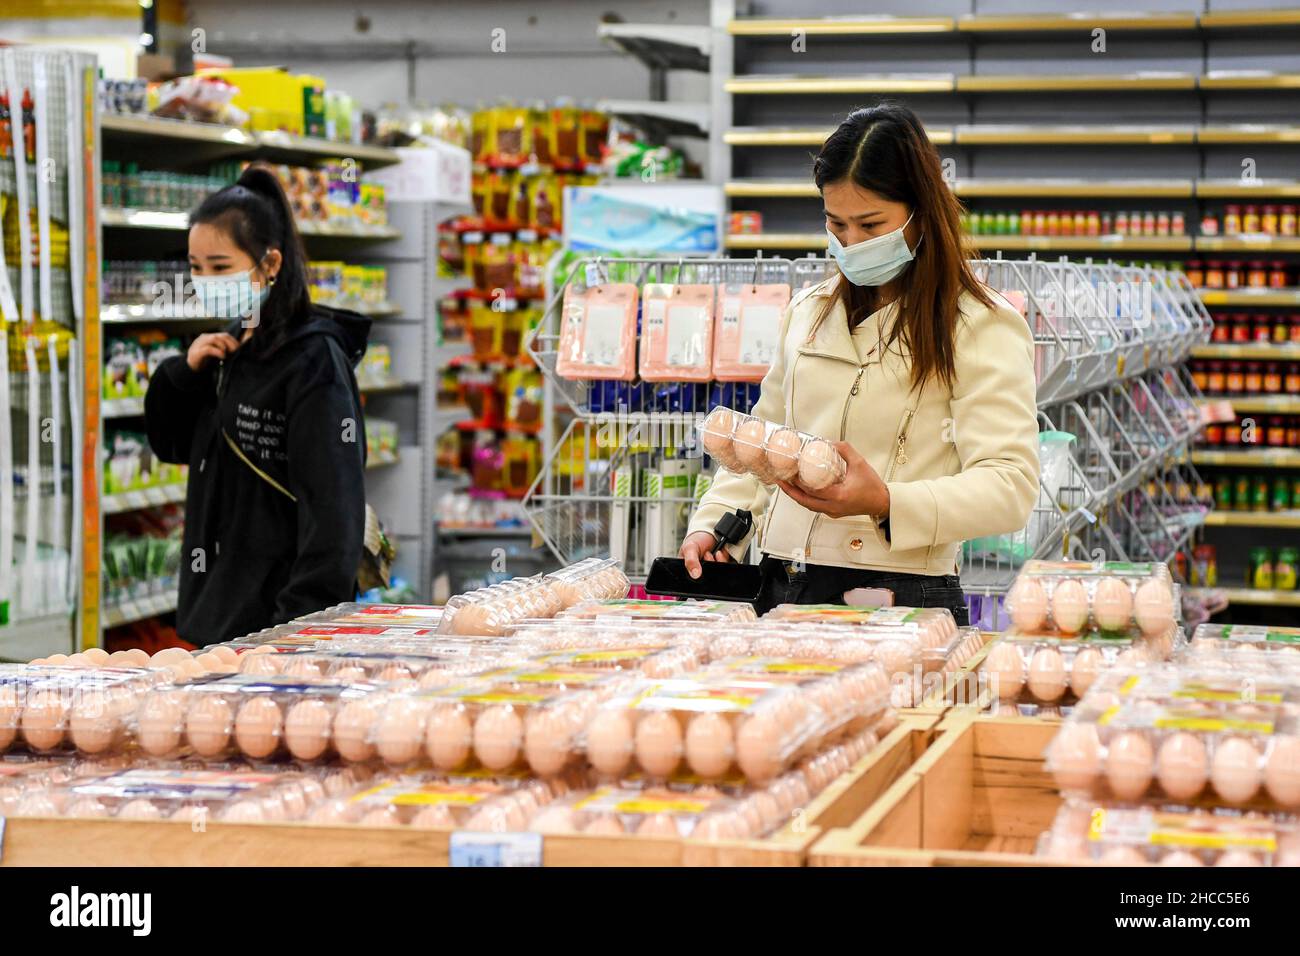 Dongxing, China's Guangxi Zhuang Autonomous Region. 27th Dec, 2021. A resident selects eggs at a supermarket in Dongxing City, south China's Guangxi Zhuang Autonomous Region, Dec. 27, 2021. Local government of Dongxing is making efforts to assure market supplies amid recent resurgence of COVID-19 cases in the city. Credit: Cao Yiming/Xinhua/Alamy Live News Stock Photo